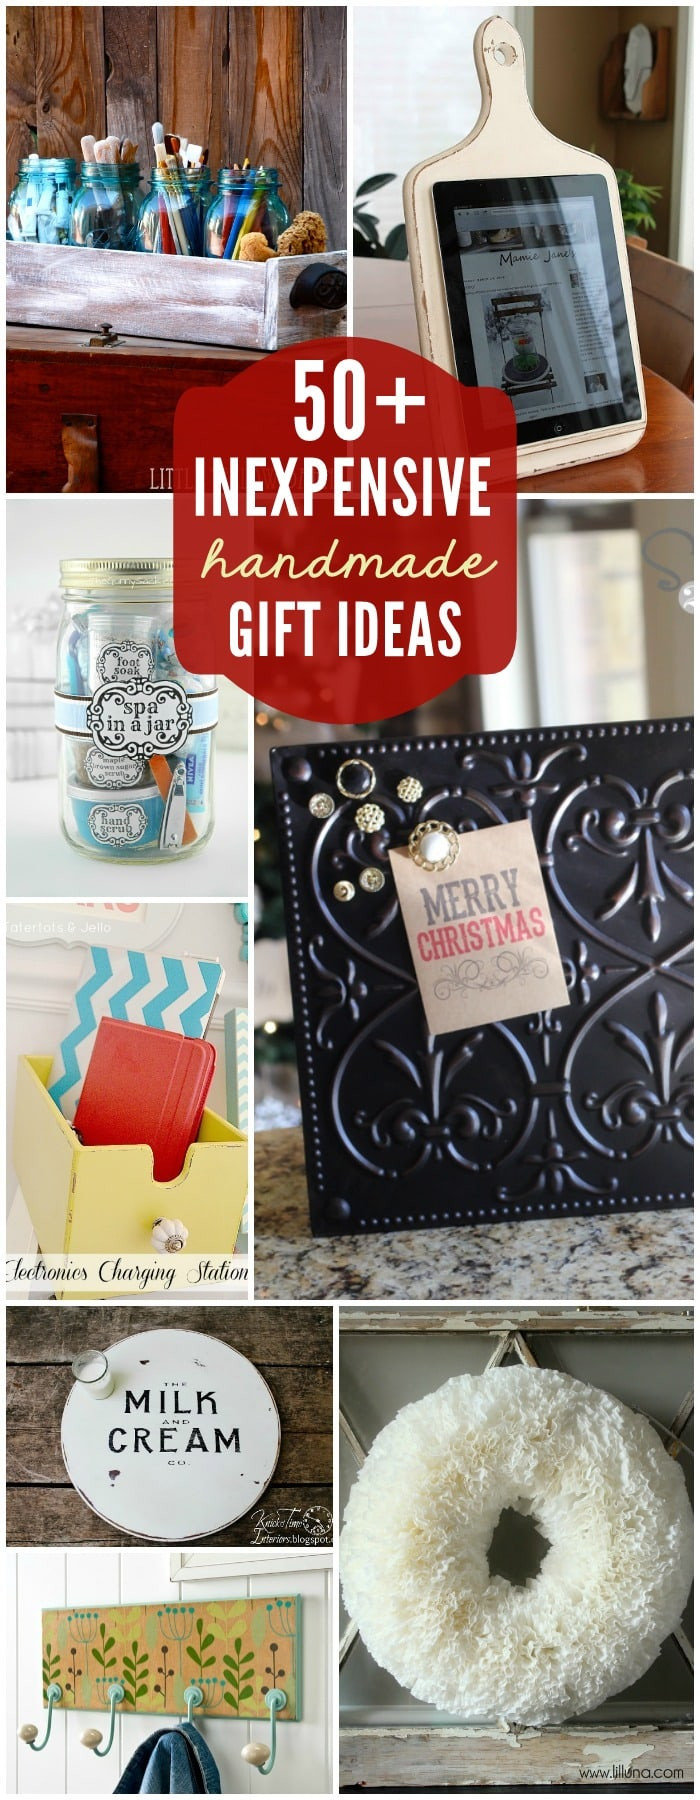 Ideas For Christmas Gift Baskets Inexpensive
 Easy DIY Gift Ideas